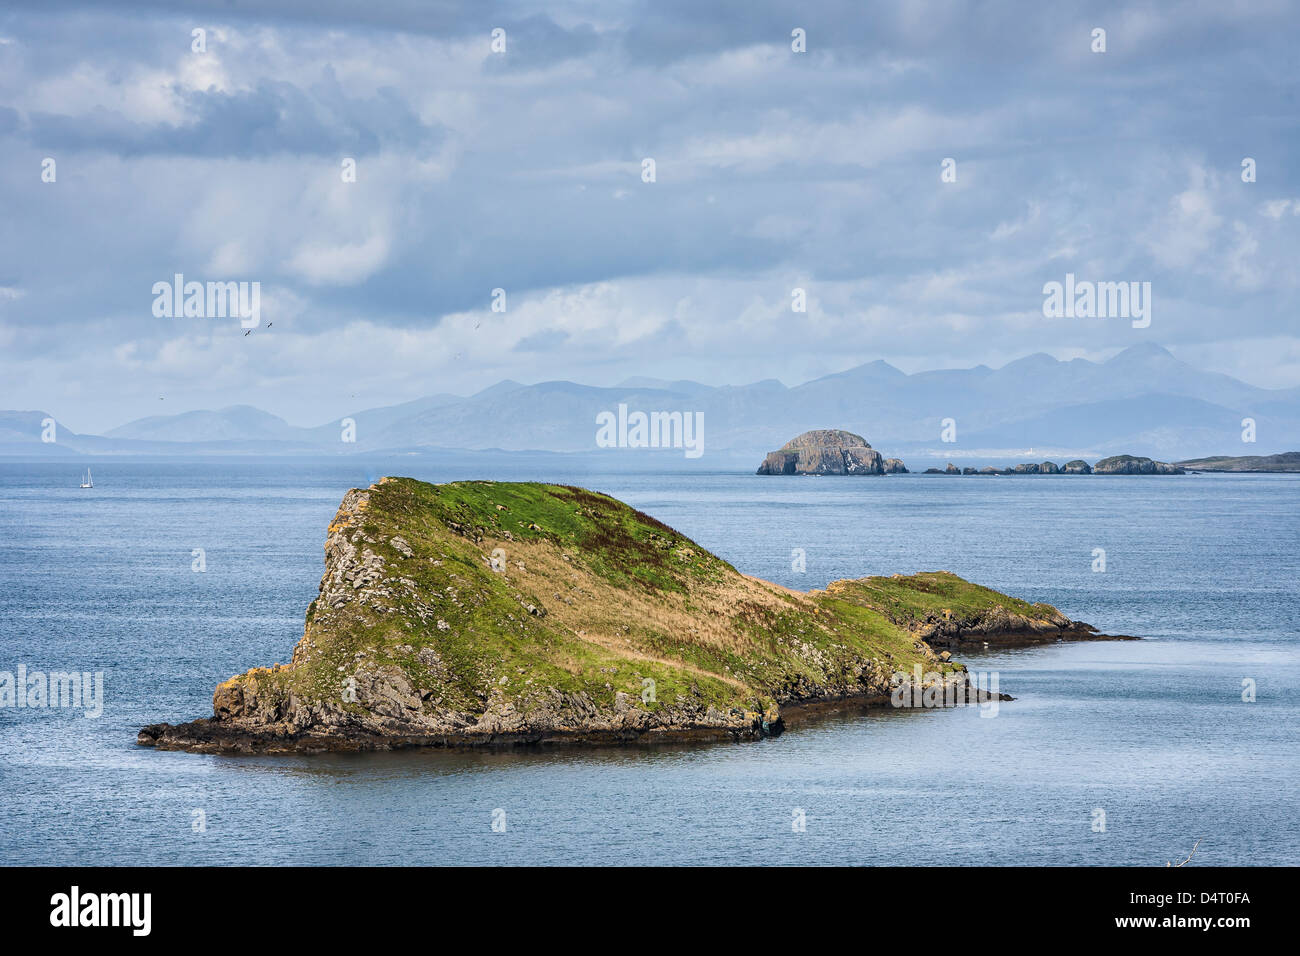 Duntulm Island off the Isle of Skye in the Hebrides, Scotland Stock Photo